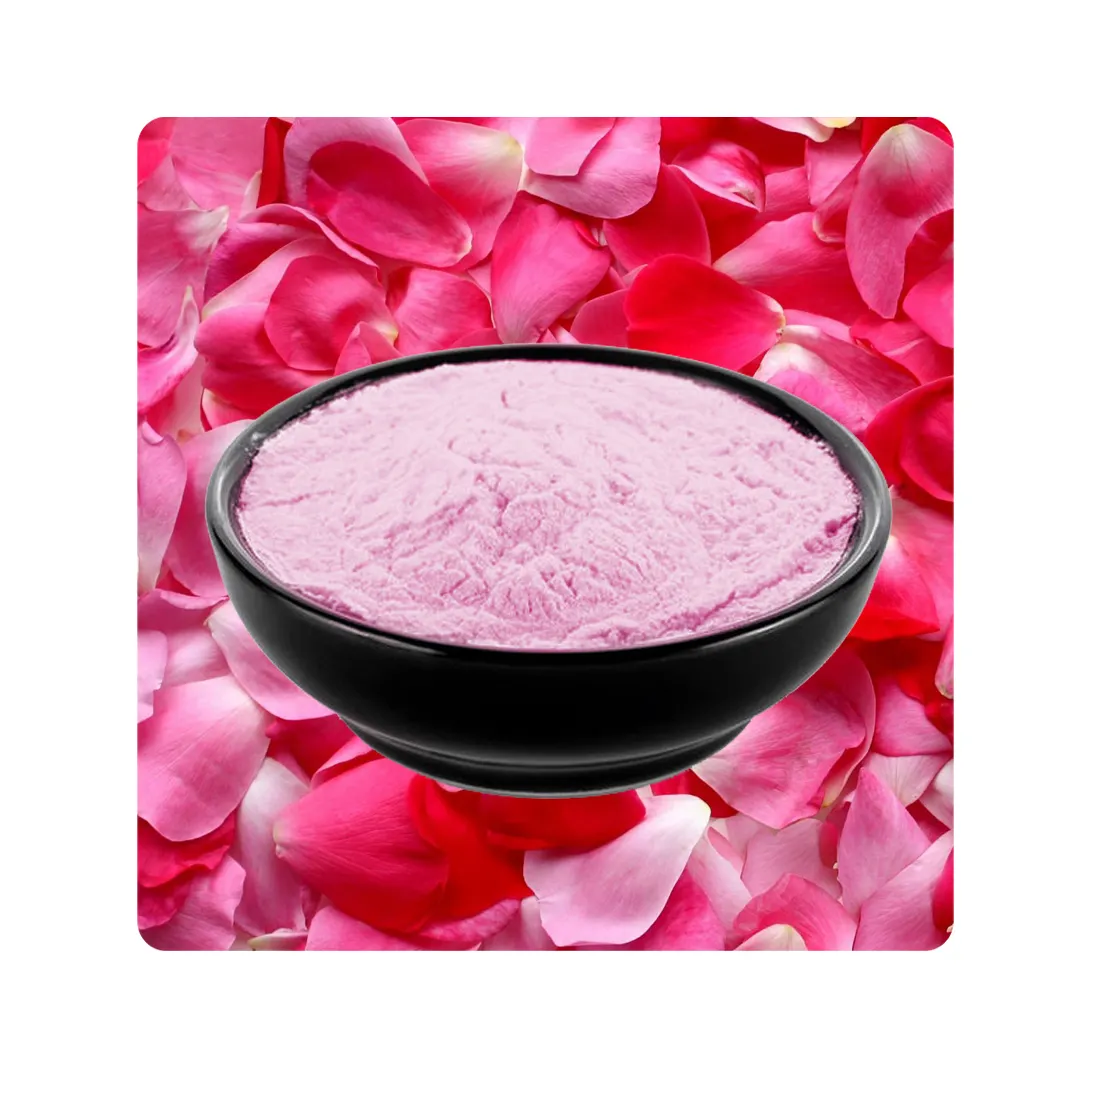 Pure and Organic Rose Petals Powder for Daily Skin and hair care finest quality chemical free Bulk manufacturer